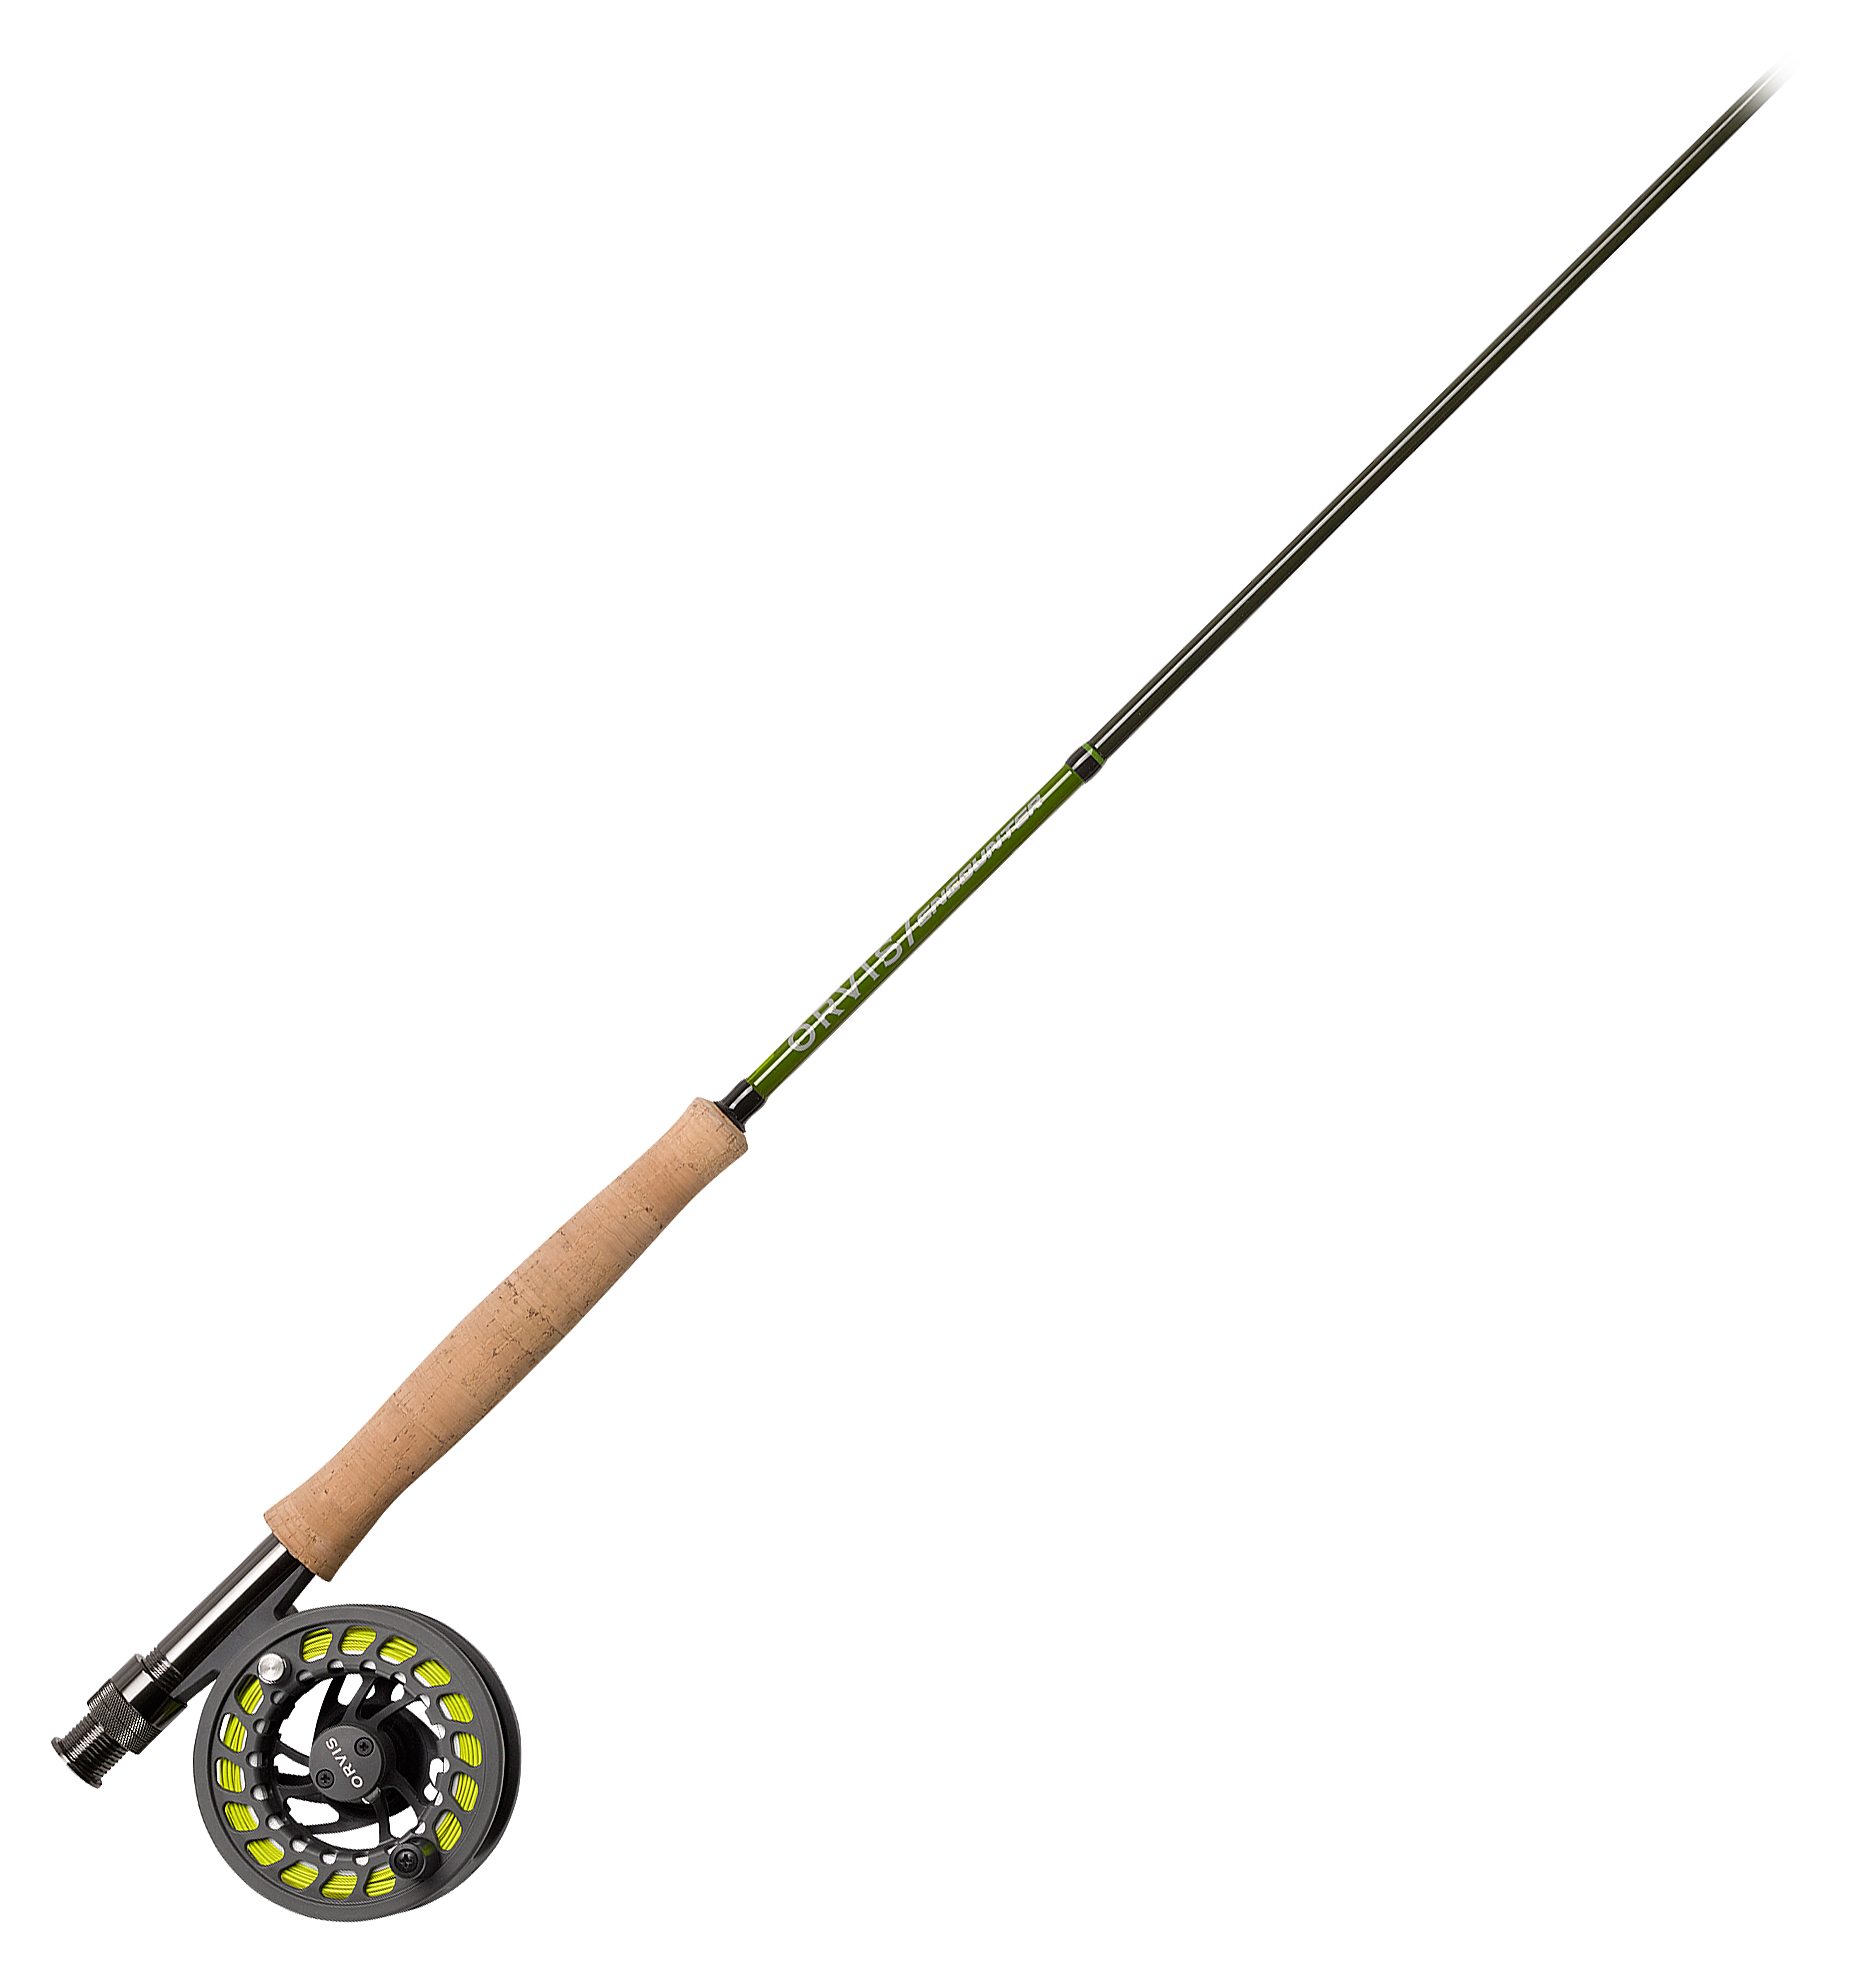 ORVIS Clearwater Fly Rod Outfit - Great Outdoor Shop